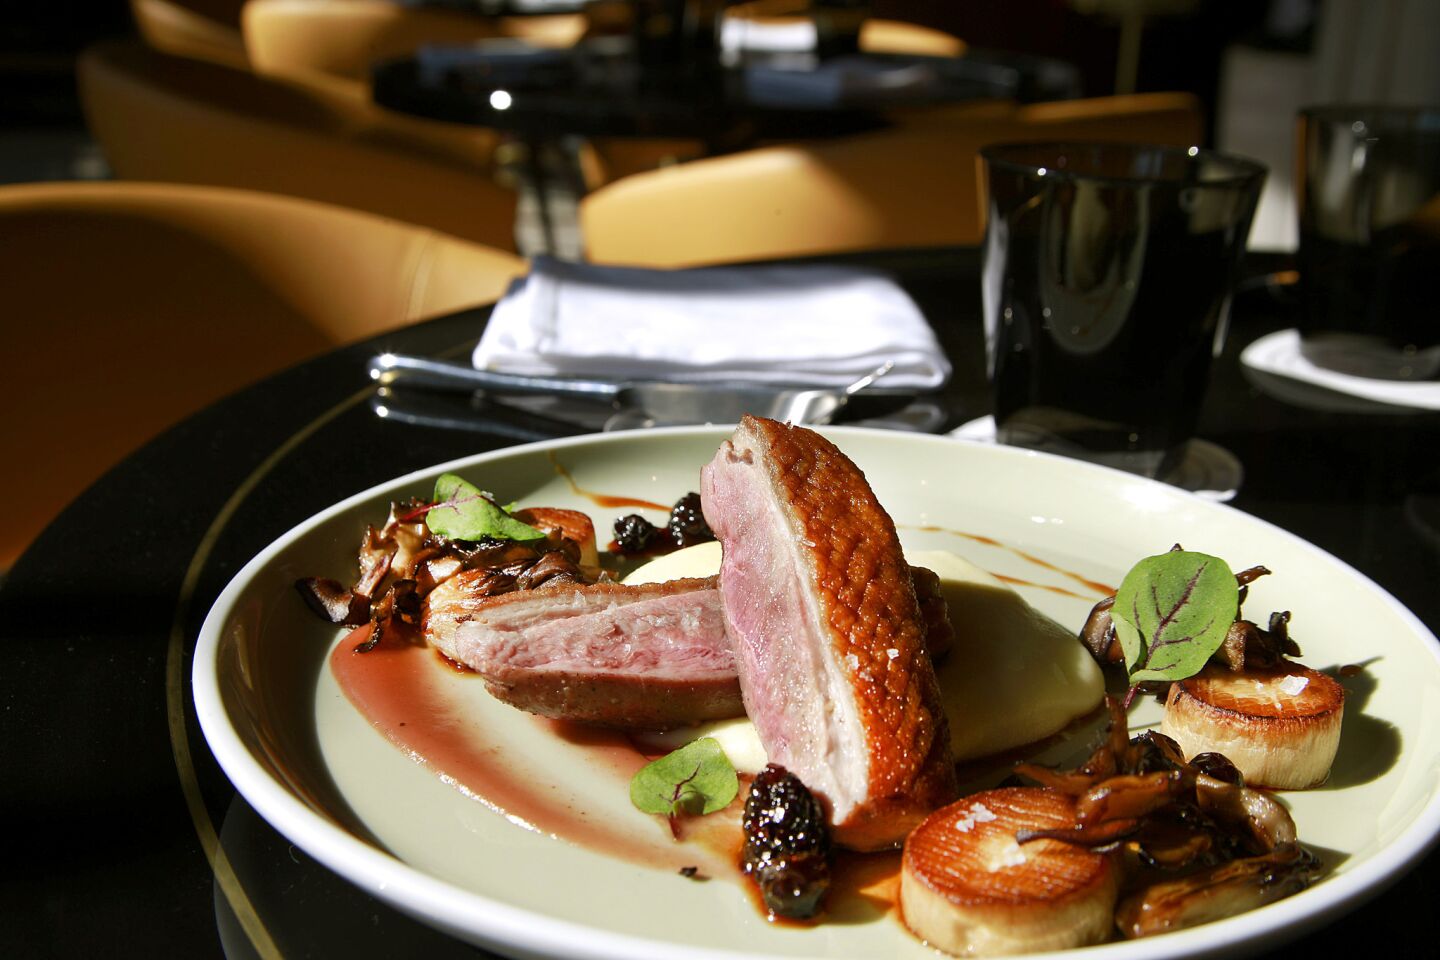 Grilled duck breast with umeboshi, ginger pomme puree and mushrooms is a favorite at Paley.